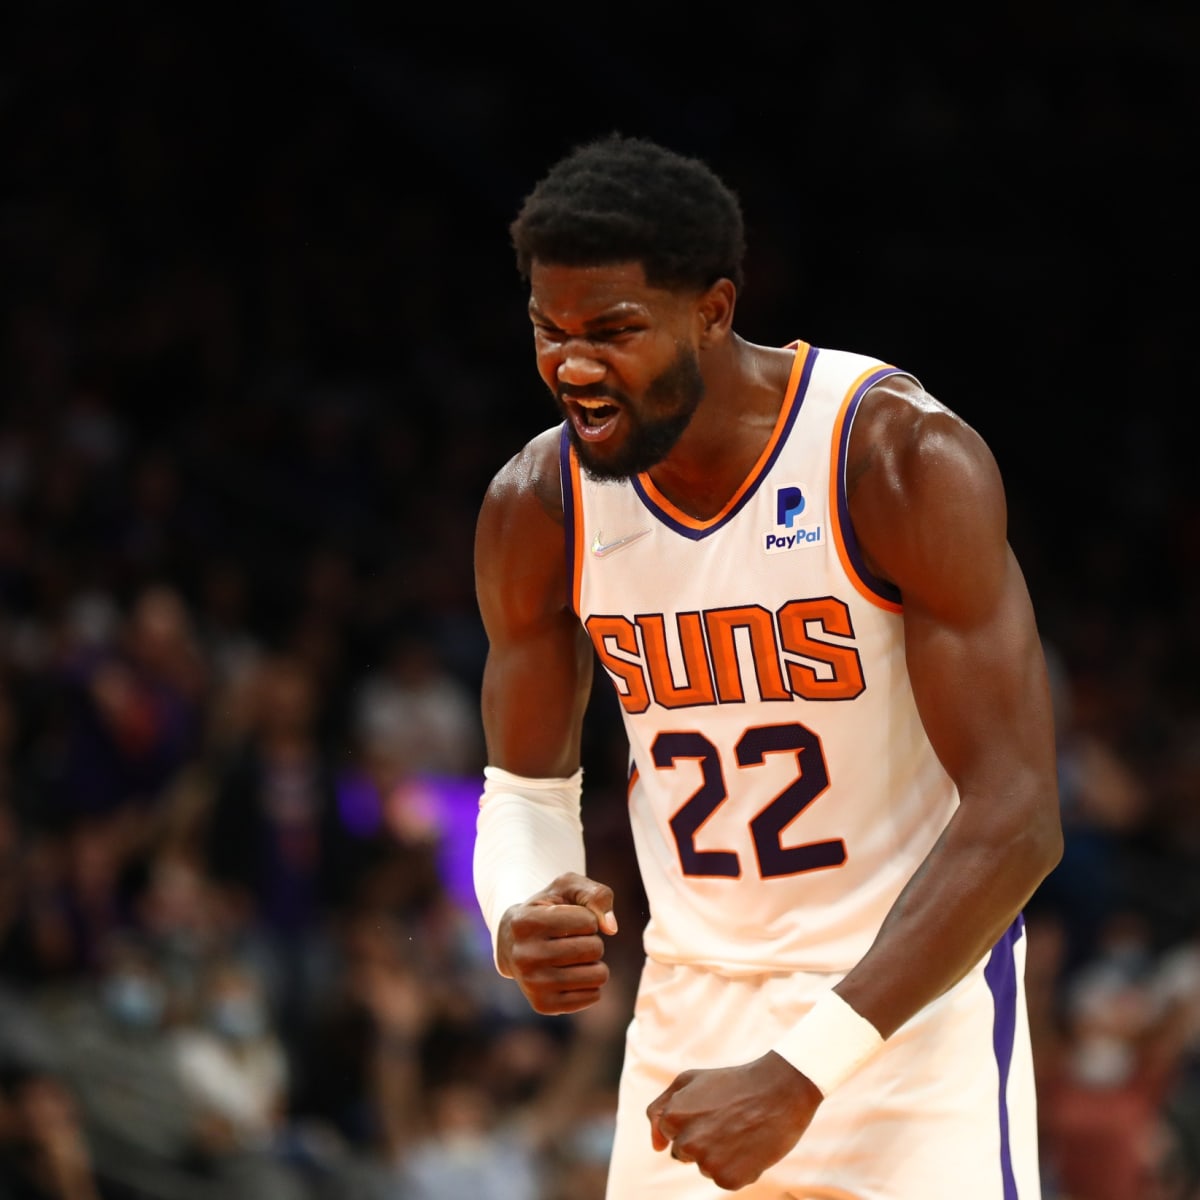 HoopsHype Ranks Phoenix Suns' Deandre Ayton as Top Five Center - Sports  Illustrated Inside The Suns News, Analysis and More